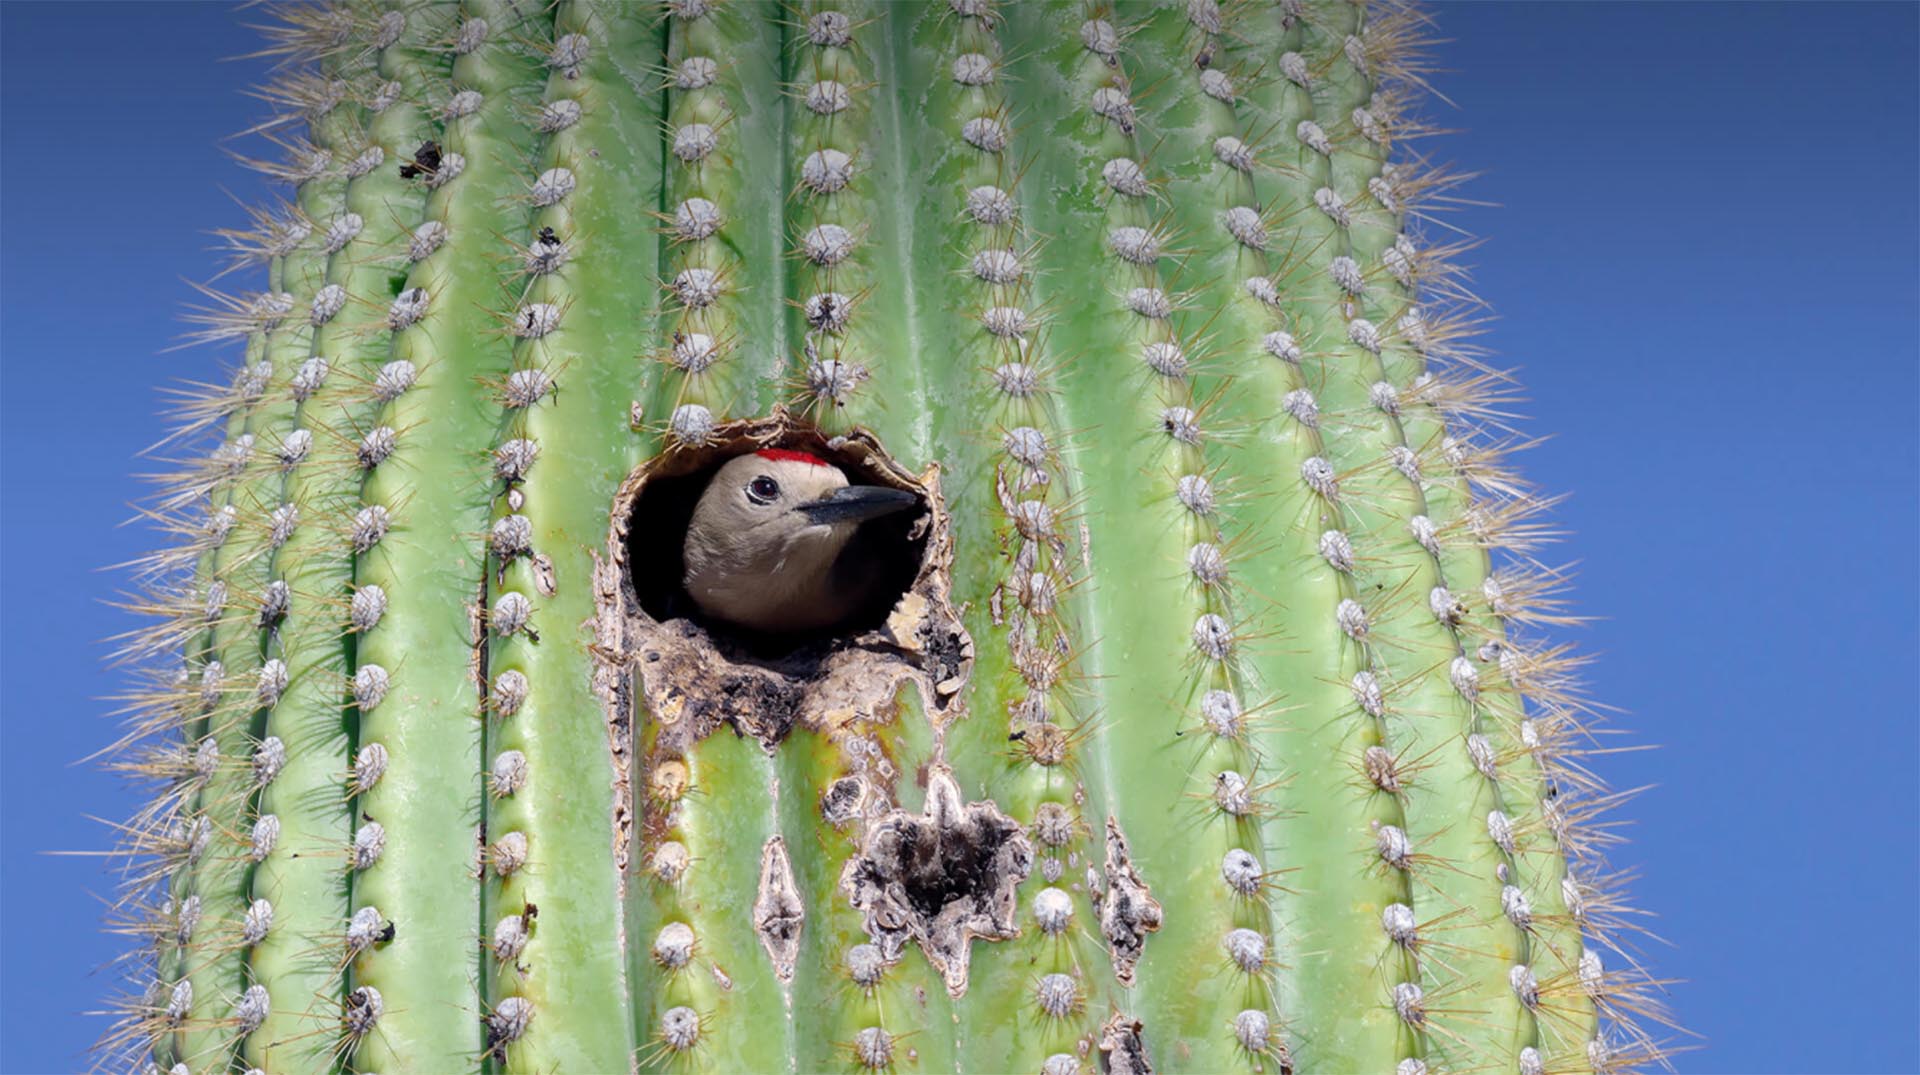 A woodpecker peeks out from a hole it has made in a large saguaro cactus.